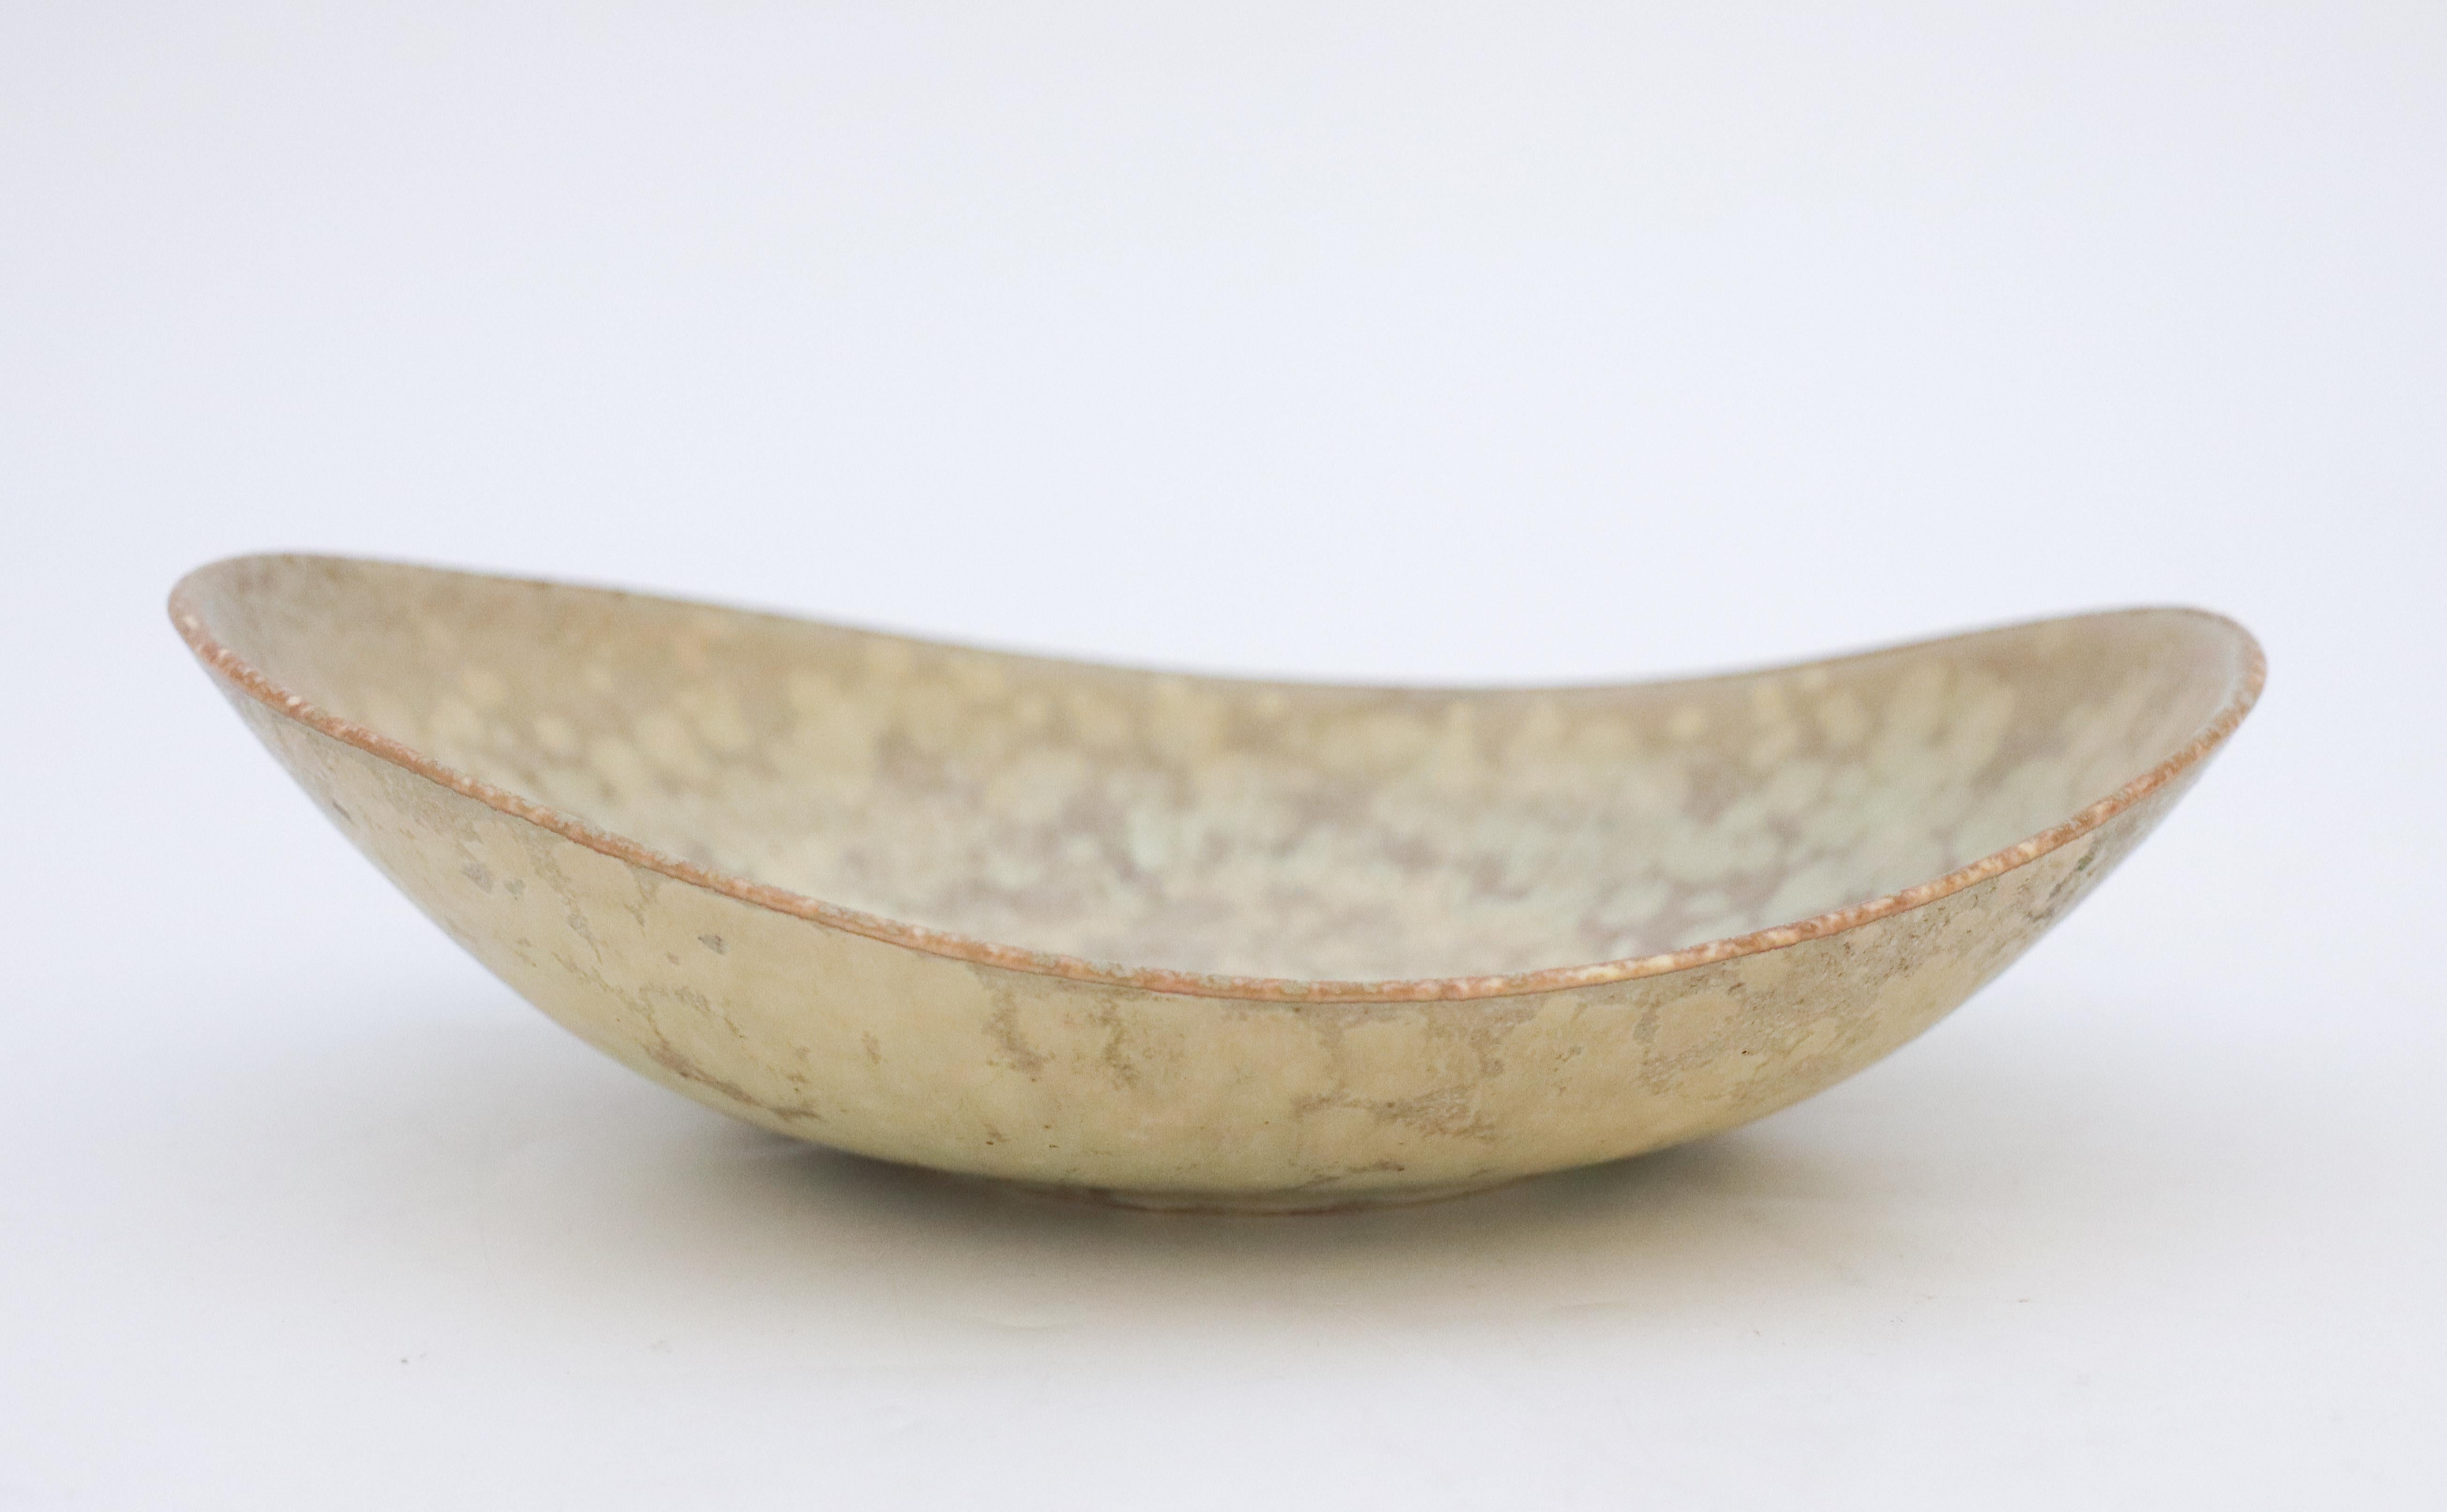 A lovely gray speckled mid-century bowl with egg-shell glaze in ceramic from Rörstrand, Sweden, designed by Carl-Harry Stålhane. The bowl is marked as 1st quality and in excellent condition. 

Carl-Harry Stålhane is one of the top names when it